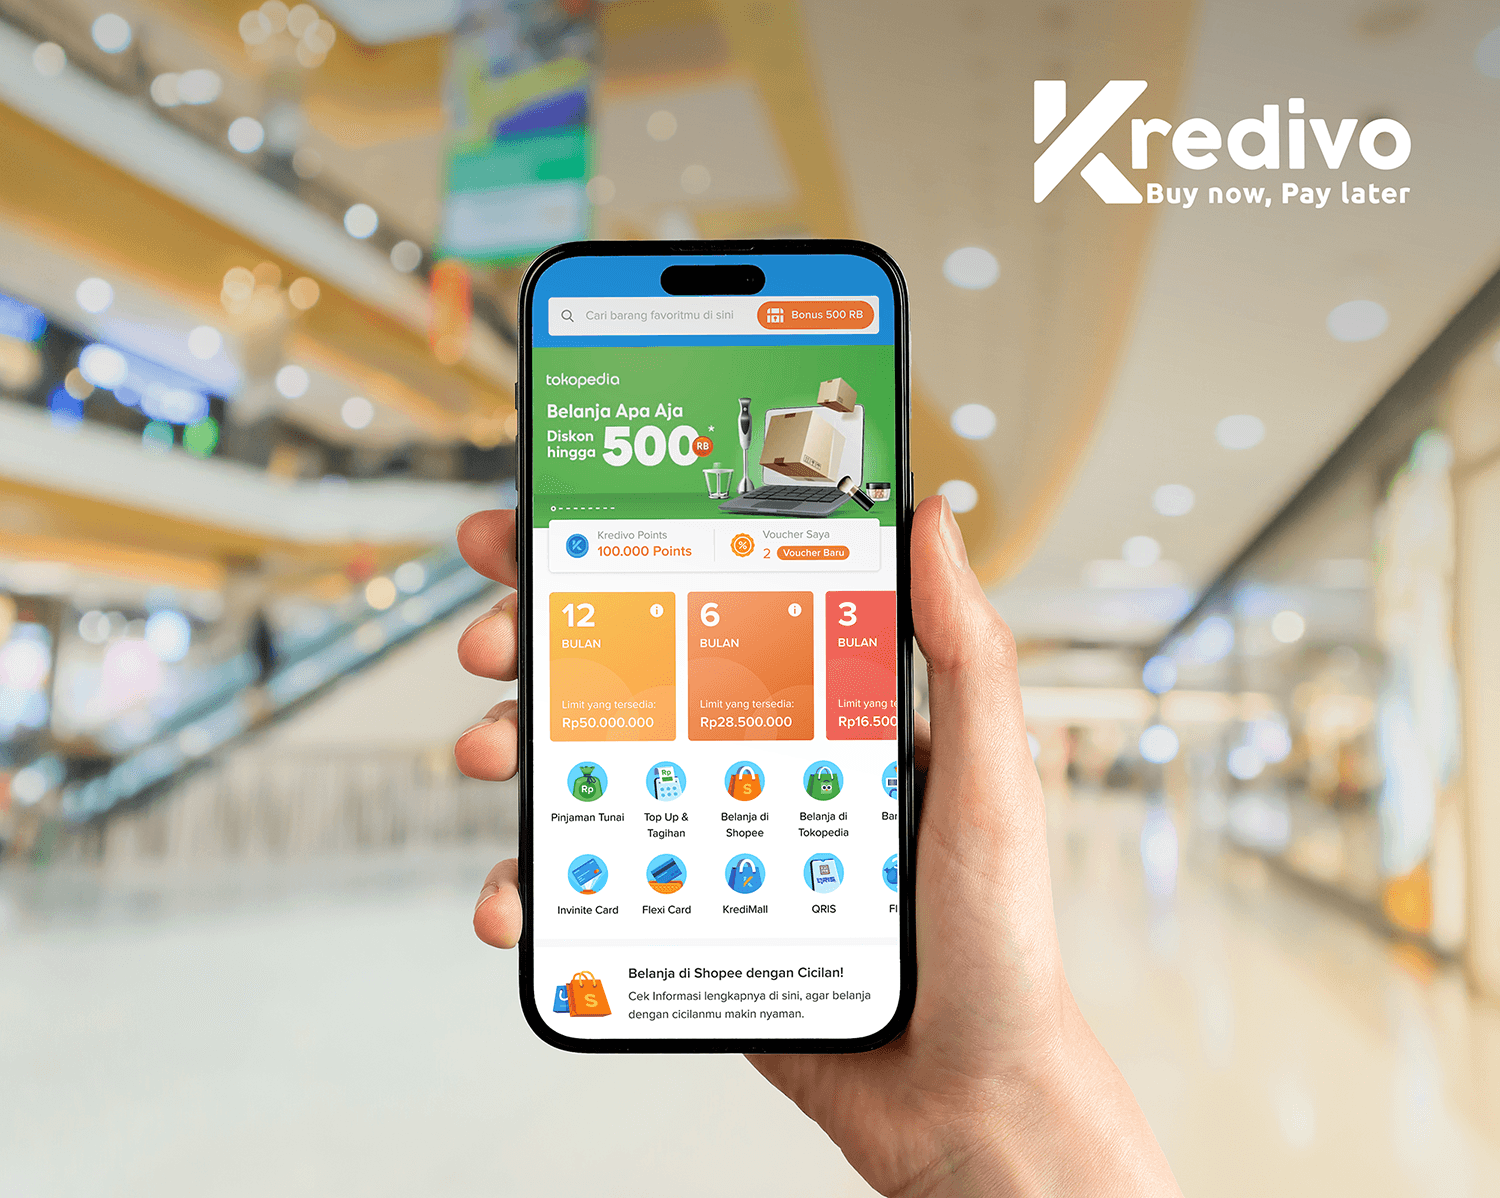 In the last five years, the number of Kredivo users has increased twentyfold (20x), demonstrating the popularity and success of this service.